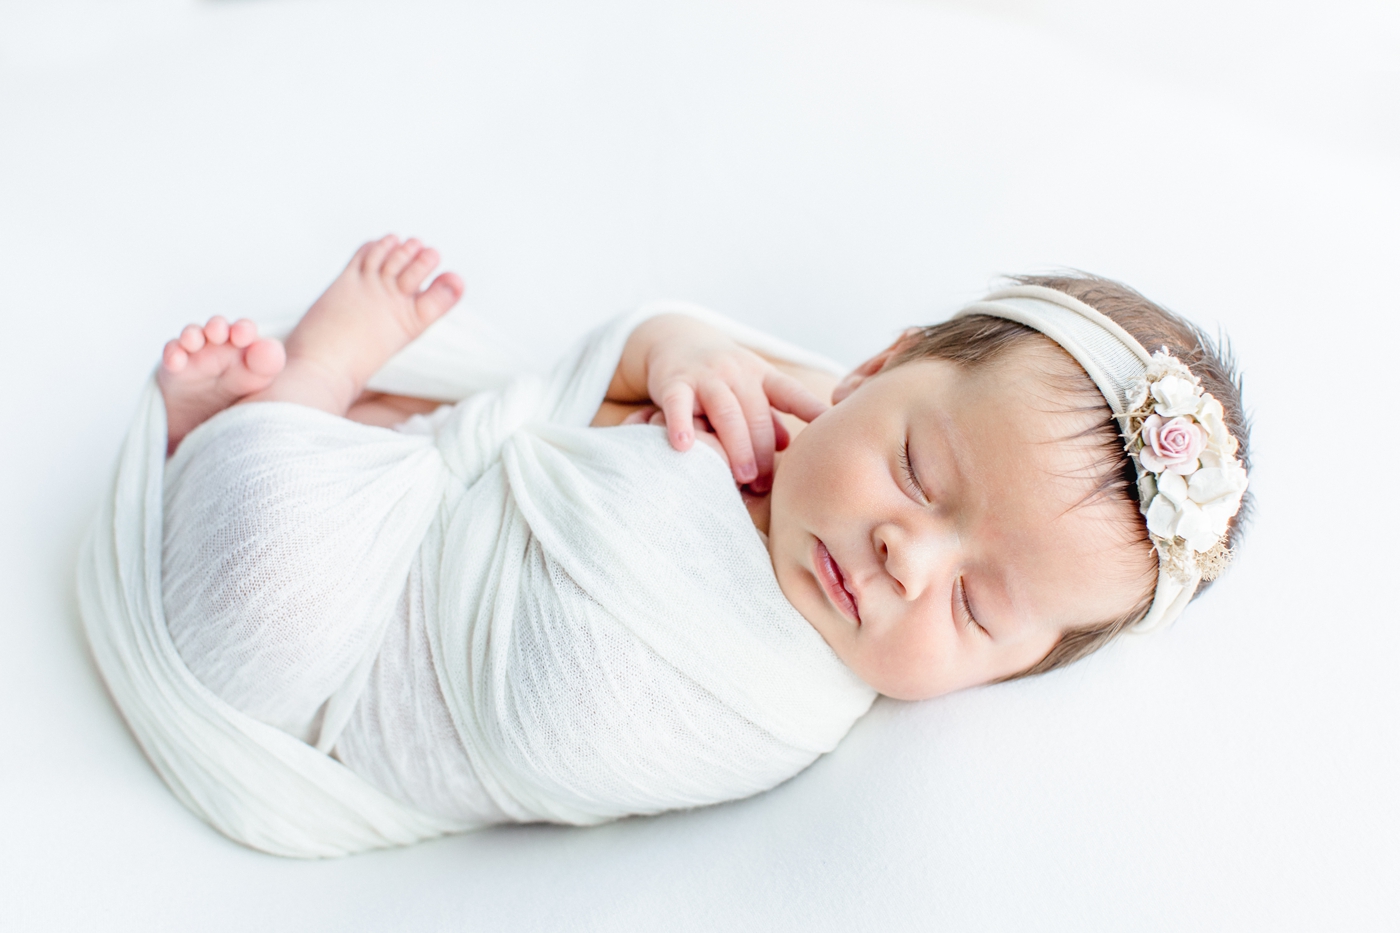 Side angle of sleeping baby girl in white swaddle with floral headband on her hair. Photo by Sana Ahmed Photography.